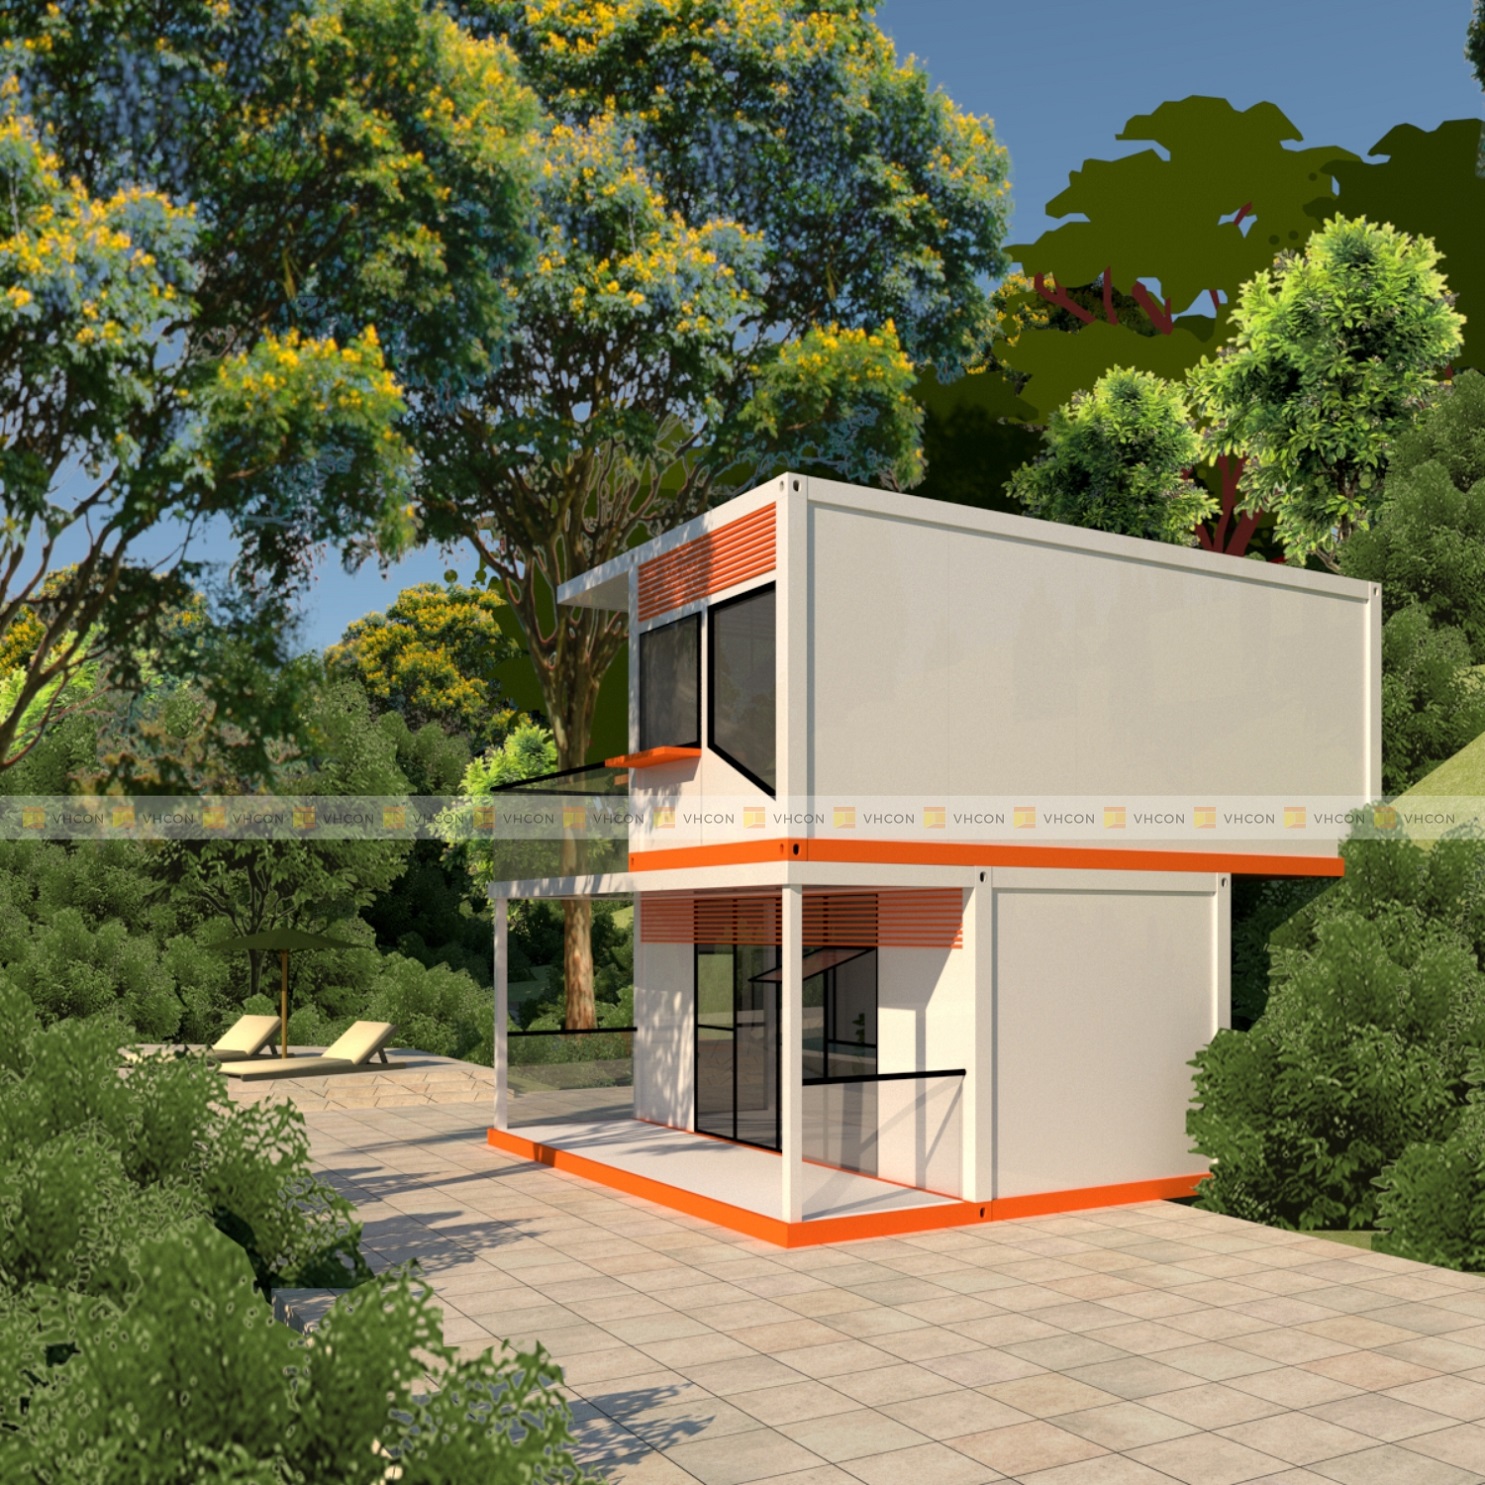 Living container house will have an excellent opportunity for development